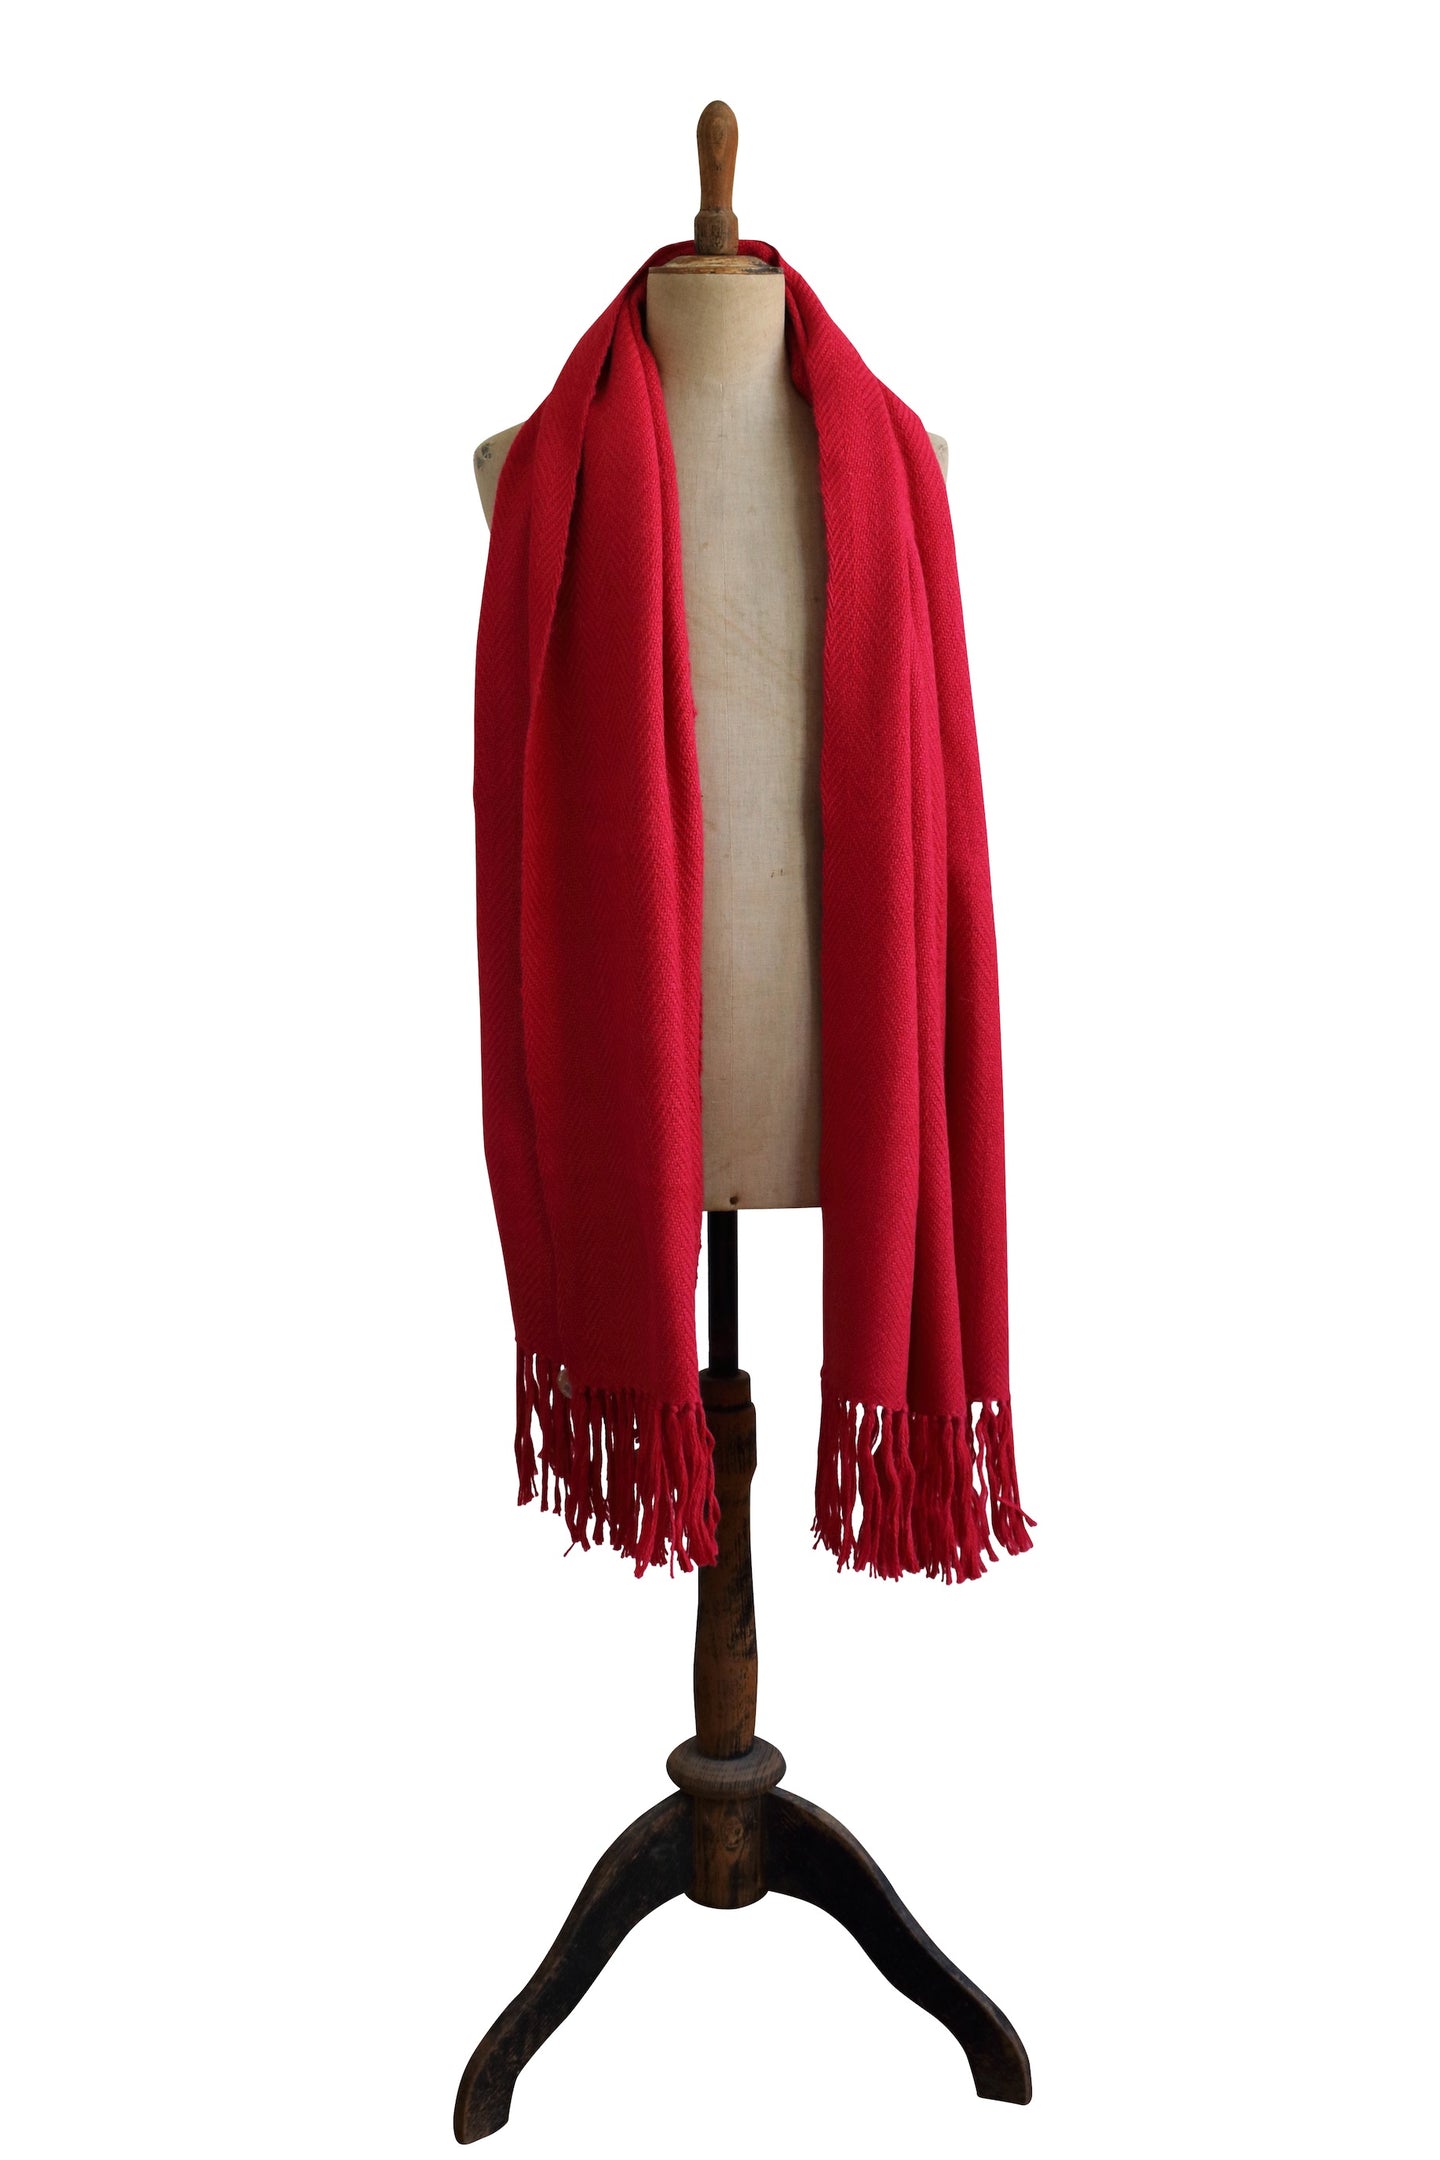 Large red scarf